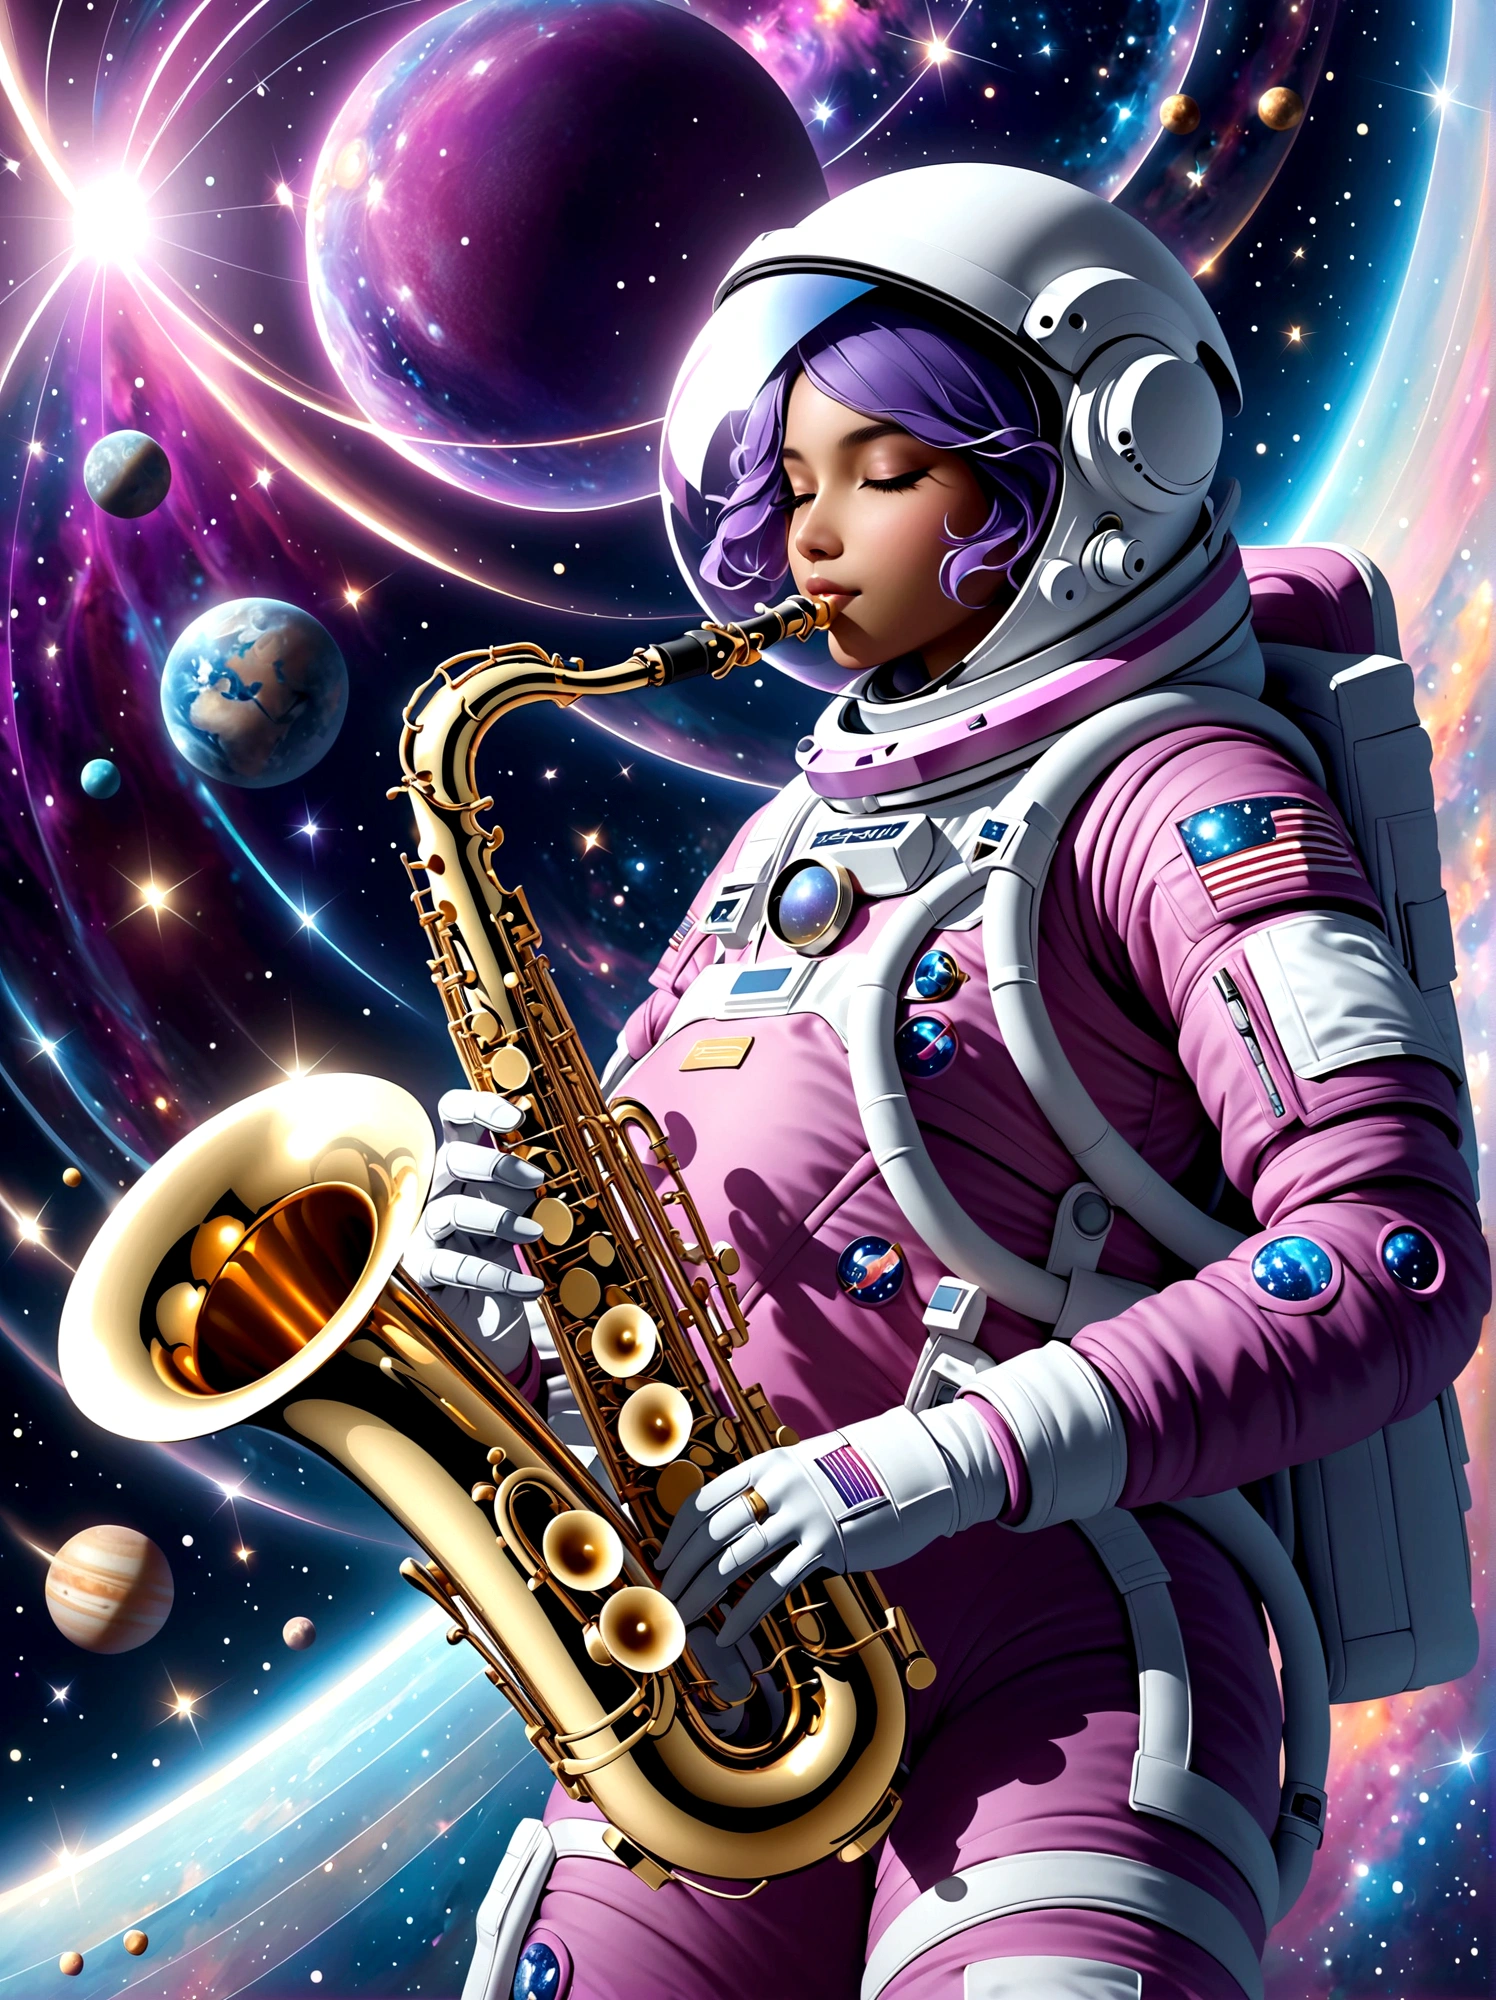 A futuristic visual of an astronaut playing a shining silver saxophone, floating amid the cosmos. The astronaut is a South Asian female, donned in a highly advanced violet-pink spacesuit equipped with glowing white lights. The background is a star-studded sky with soft hues of blues and purples, featuring galaxies far away. Also visible are celestial bodies like moons and distant planets with rings around them. The cosmic wisps and twinkling stars reflected on her helmet visor add a magical touch. The saxophone is producing a marvellous spectrum of musical notes, which glow and dissolve into the vast space around her